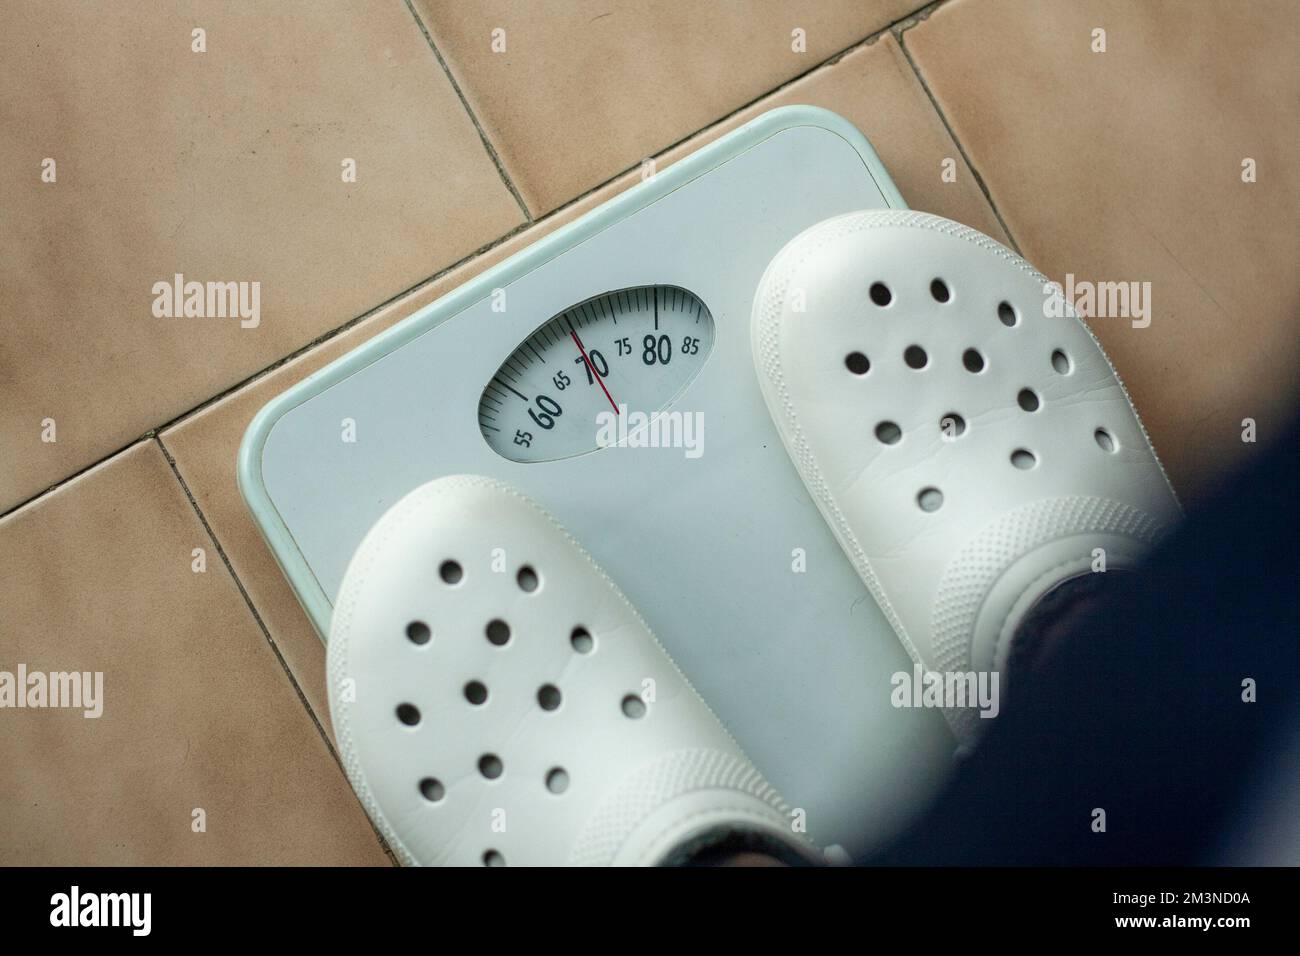 https://c8.alamy.com/comp/2M3ND0A/analog-scale-where-a-person-is-weighed-and-its-weight-can-be-seen-in-kg-2M3ND0A.jpg